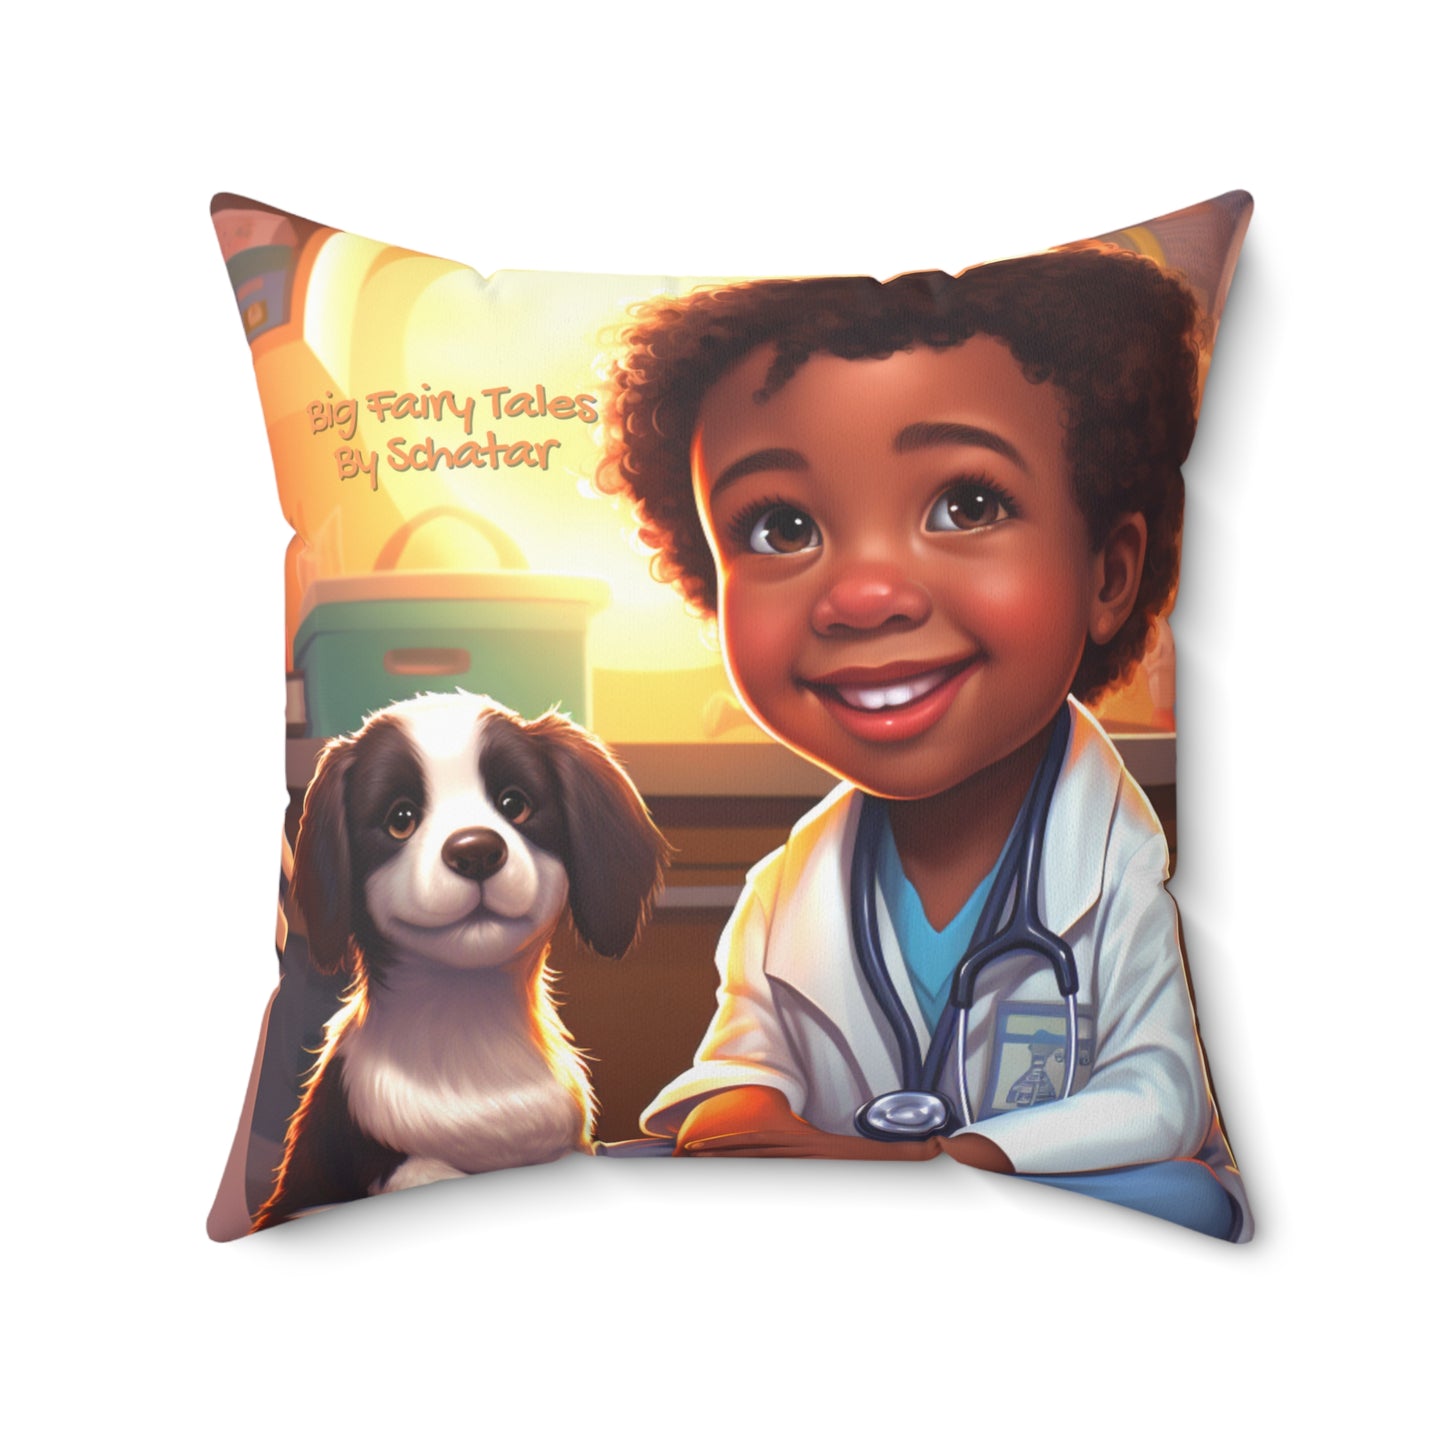 Veterinarian - Big Little Professionals Plush Pillow 6 From Big Fairy Tales By Schatar